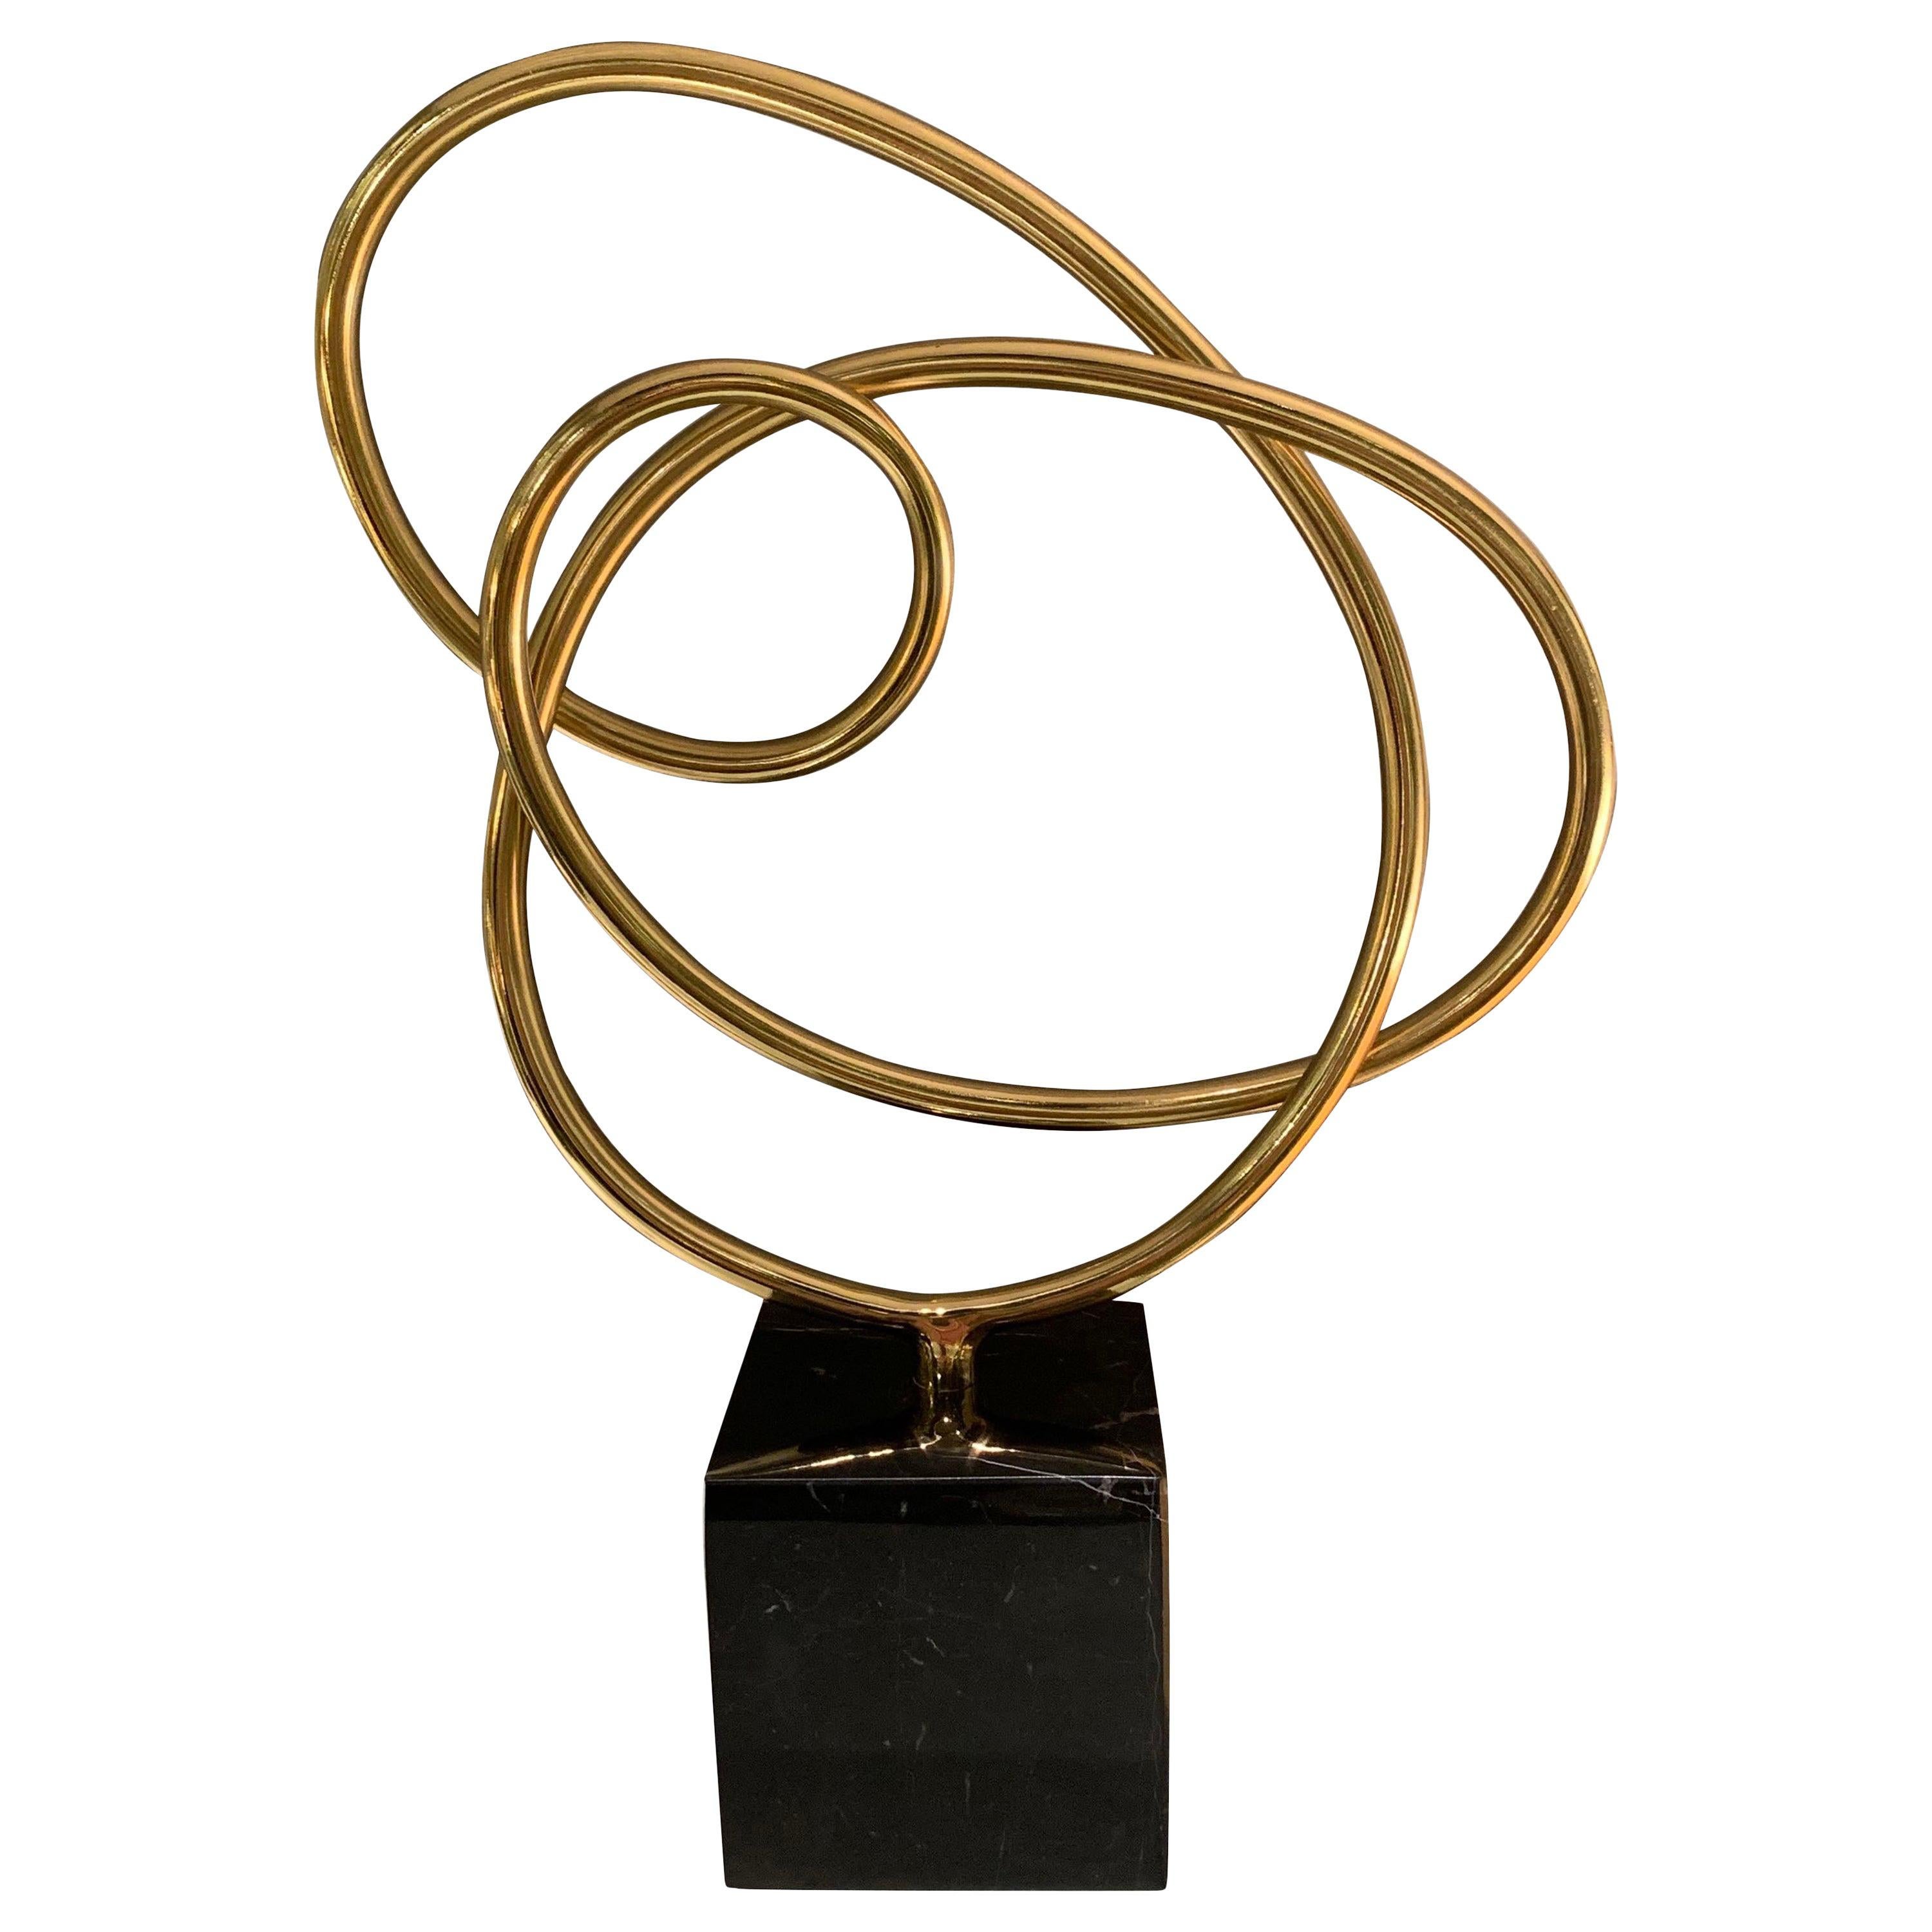 Thin Ribbon Shaped Brass Free Form Sculpture, Indonesia, Contemporary